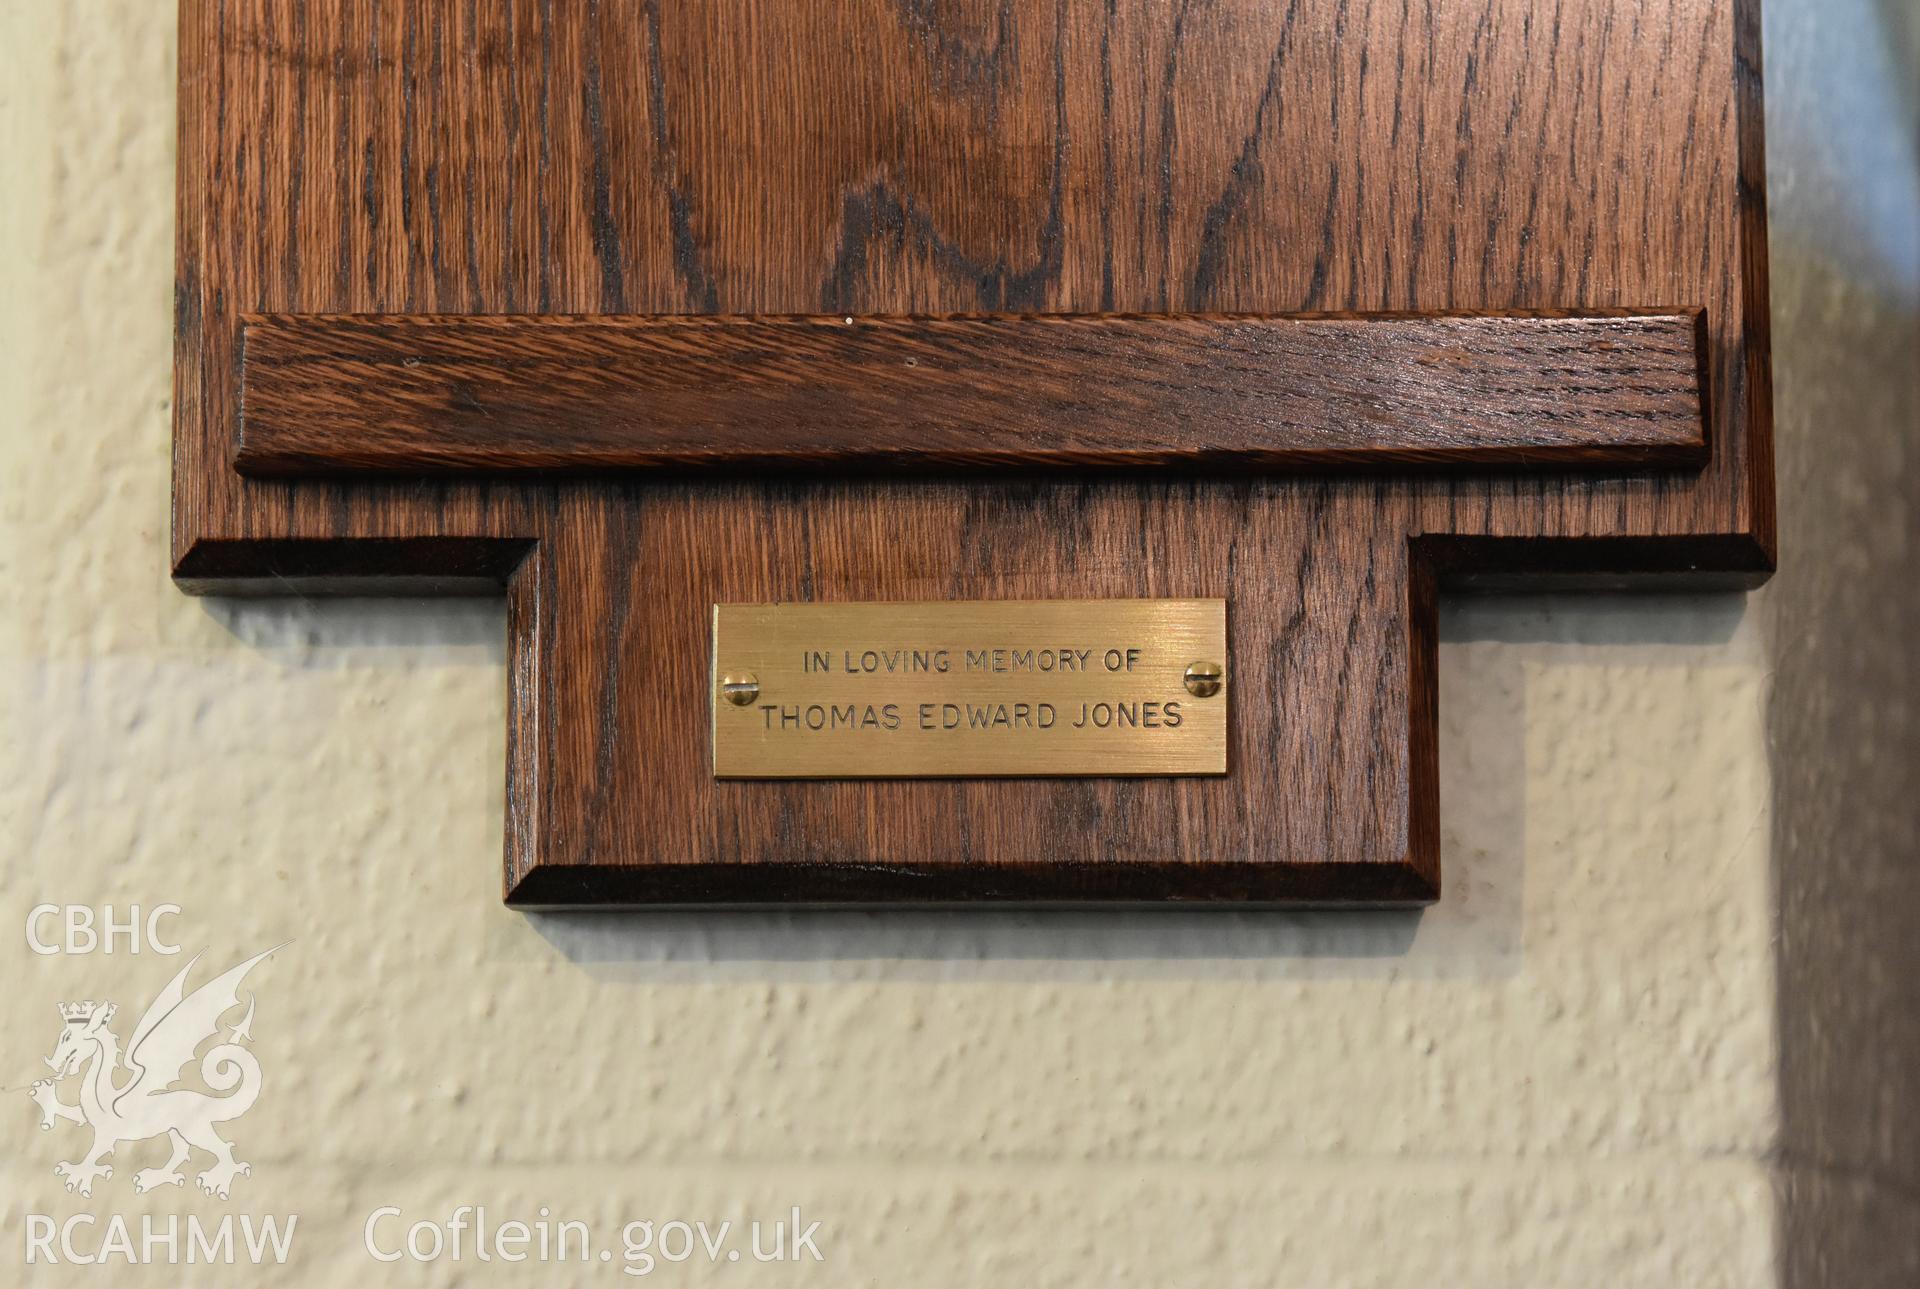 Detail of the bottom of the wooden hymn board at Hyssington Primitive Methodist Chapel, Hyssington, Churchstoke. Photographic survey conducted by Sue Fielding on 7th December 2018. Transcription: IN LOVING MEMORY OF/ THOMAS EDWARD JONES